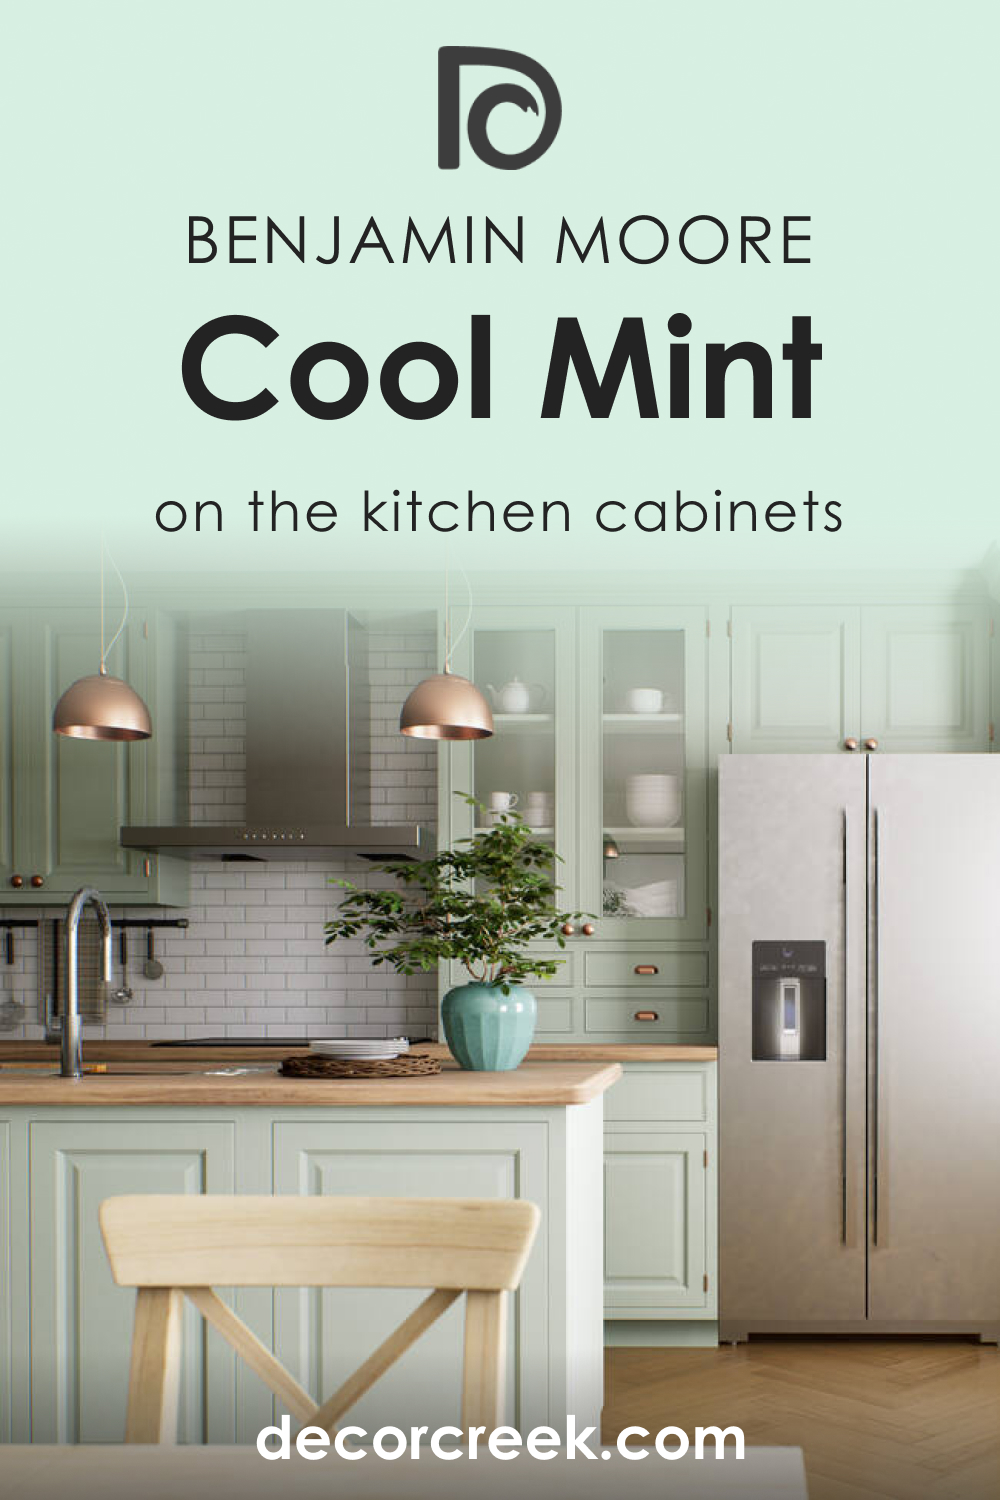 How to Use Cool Mint 582 on Kitchen Cabinets?